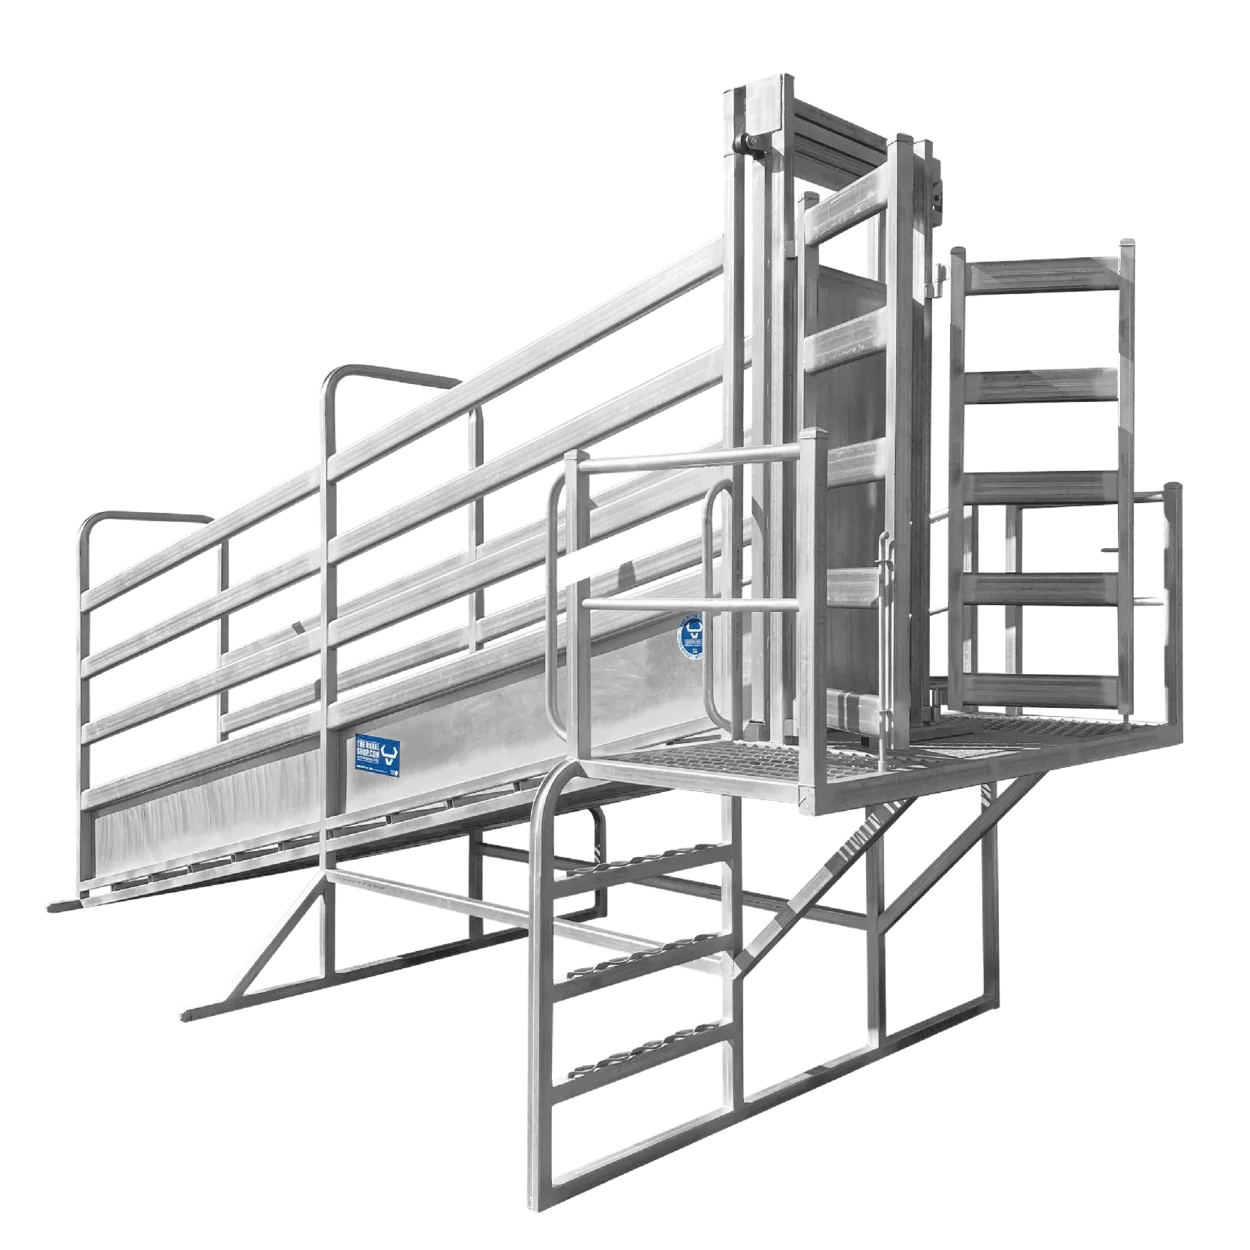 5.5m heavy duty side loader loading ramp. Includes: full walkway on nearside with safety hand rails, offside ladder platform access, sheeted top slide gate, batwing gates on front of platform for side loading and a gentle slope for safe, fast and efficient loading. Available in 5.5m total length.